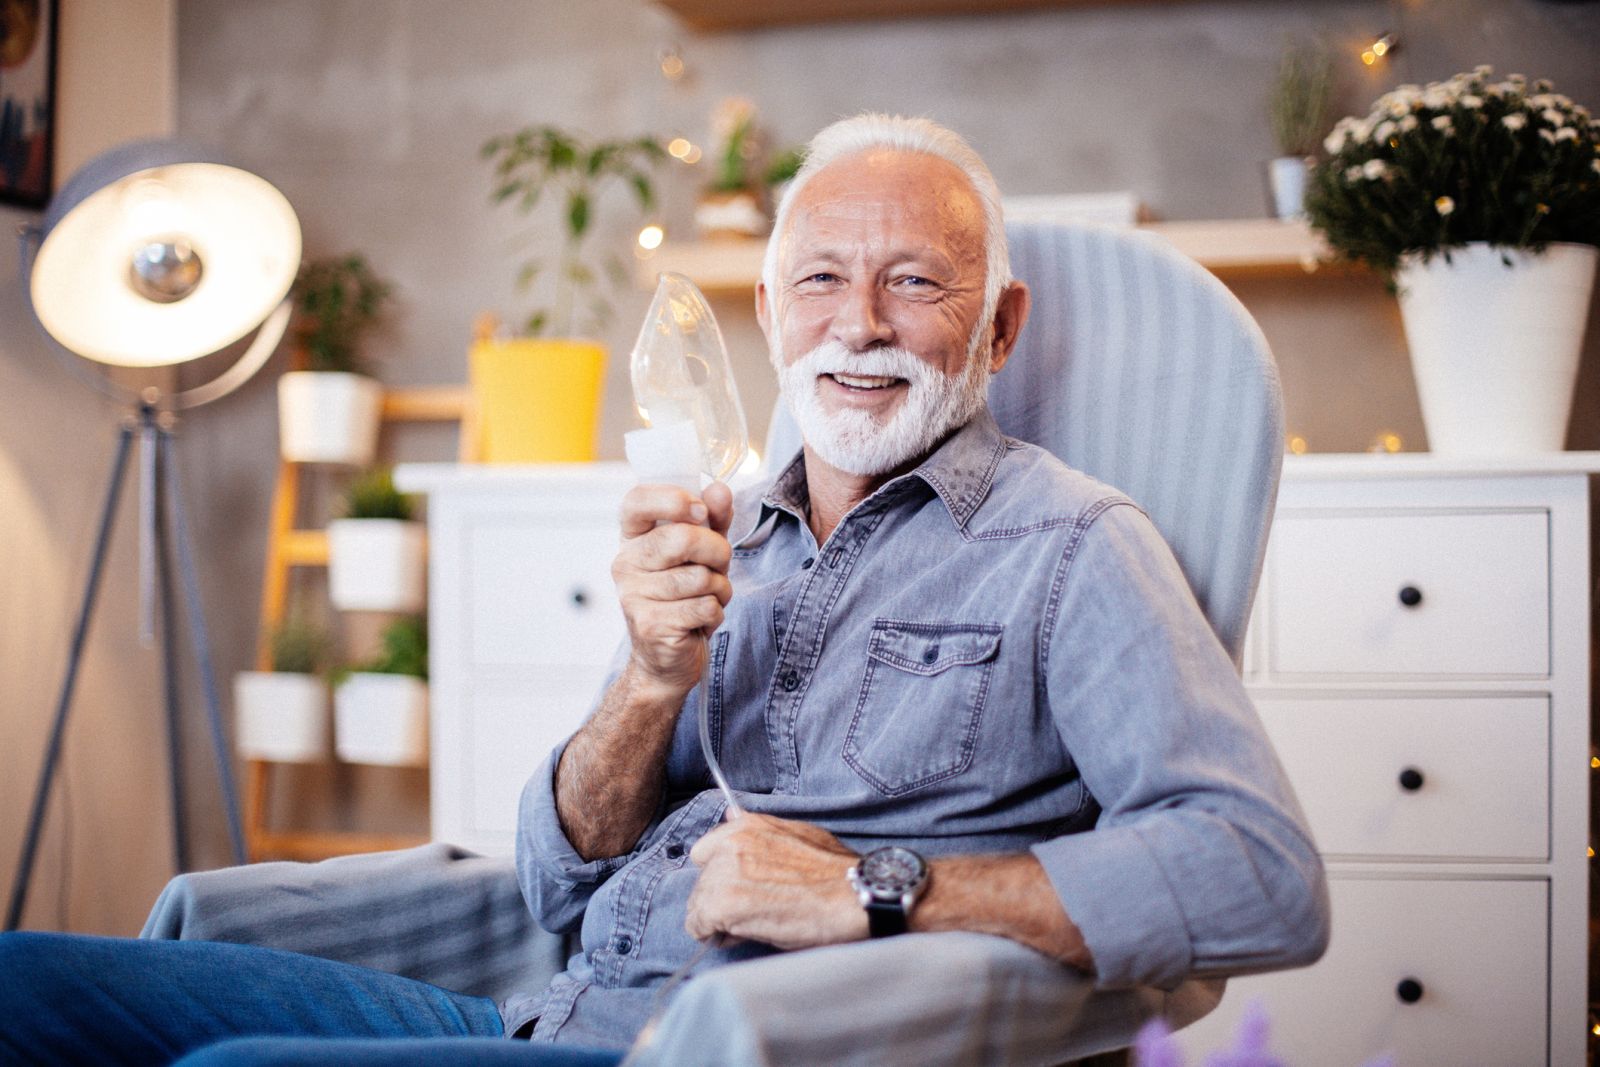 Smiling senior man sitting in chair with a respiratory mask in his hand